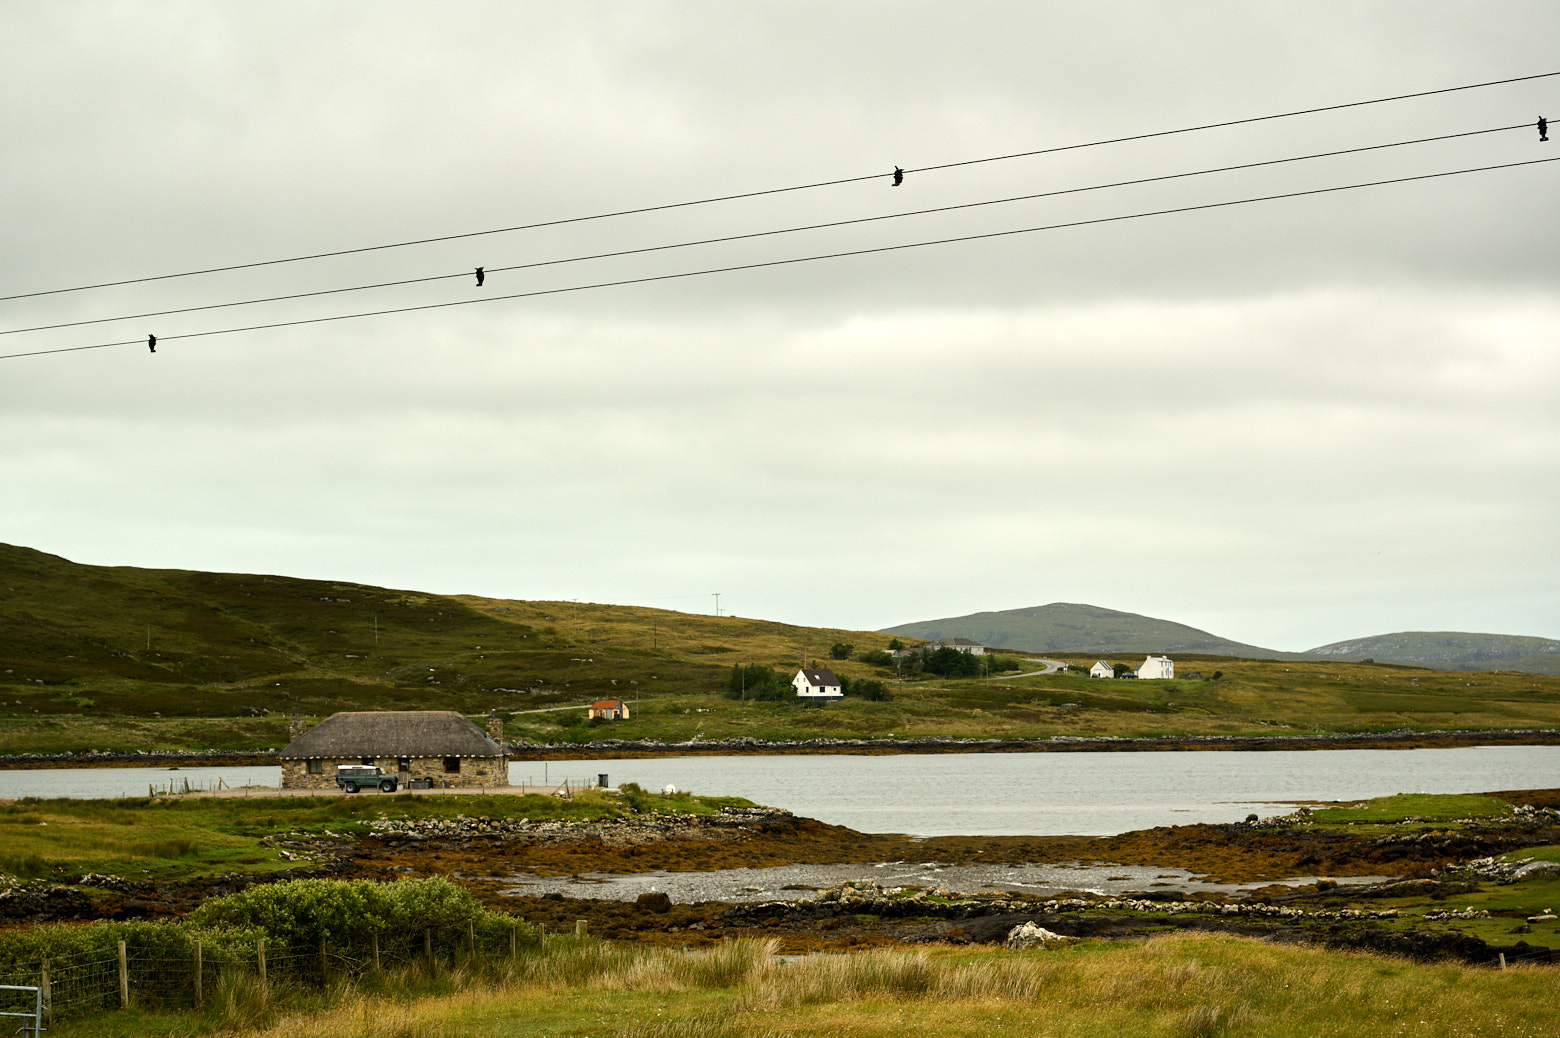 a day in Berneray, North Uist, Outer Hebrides